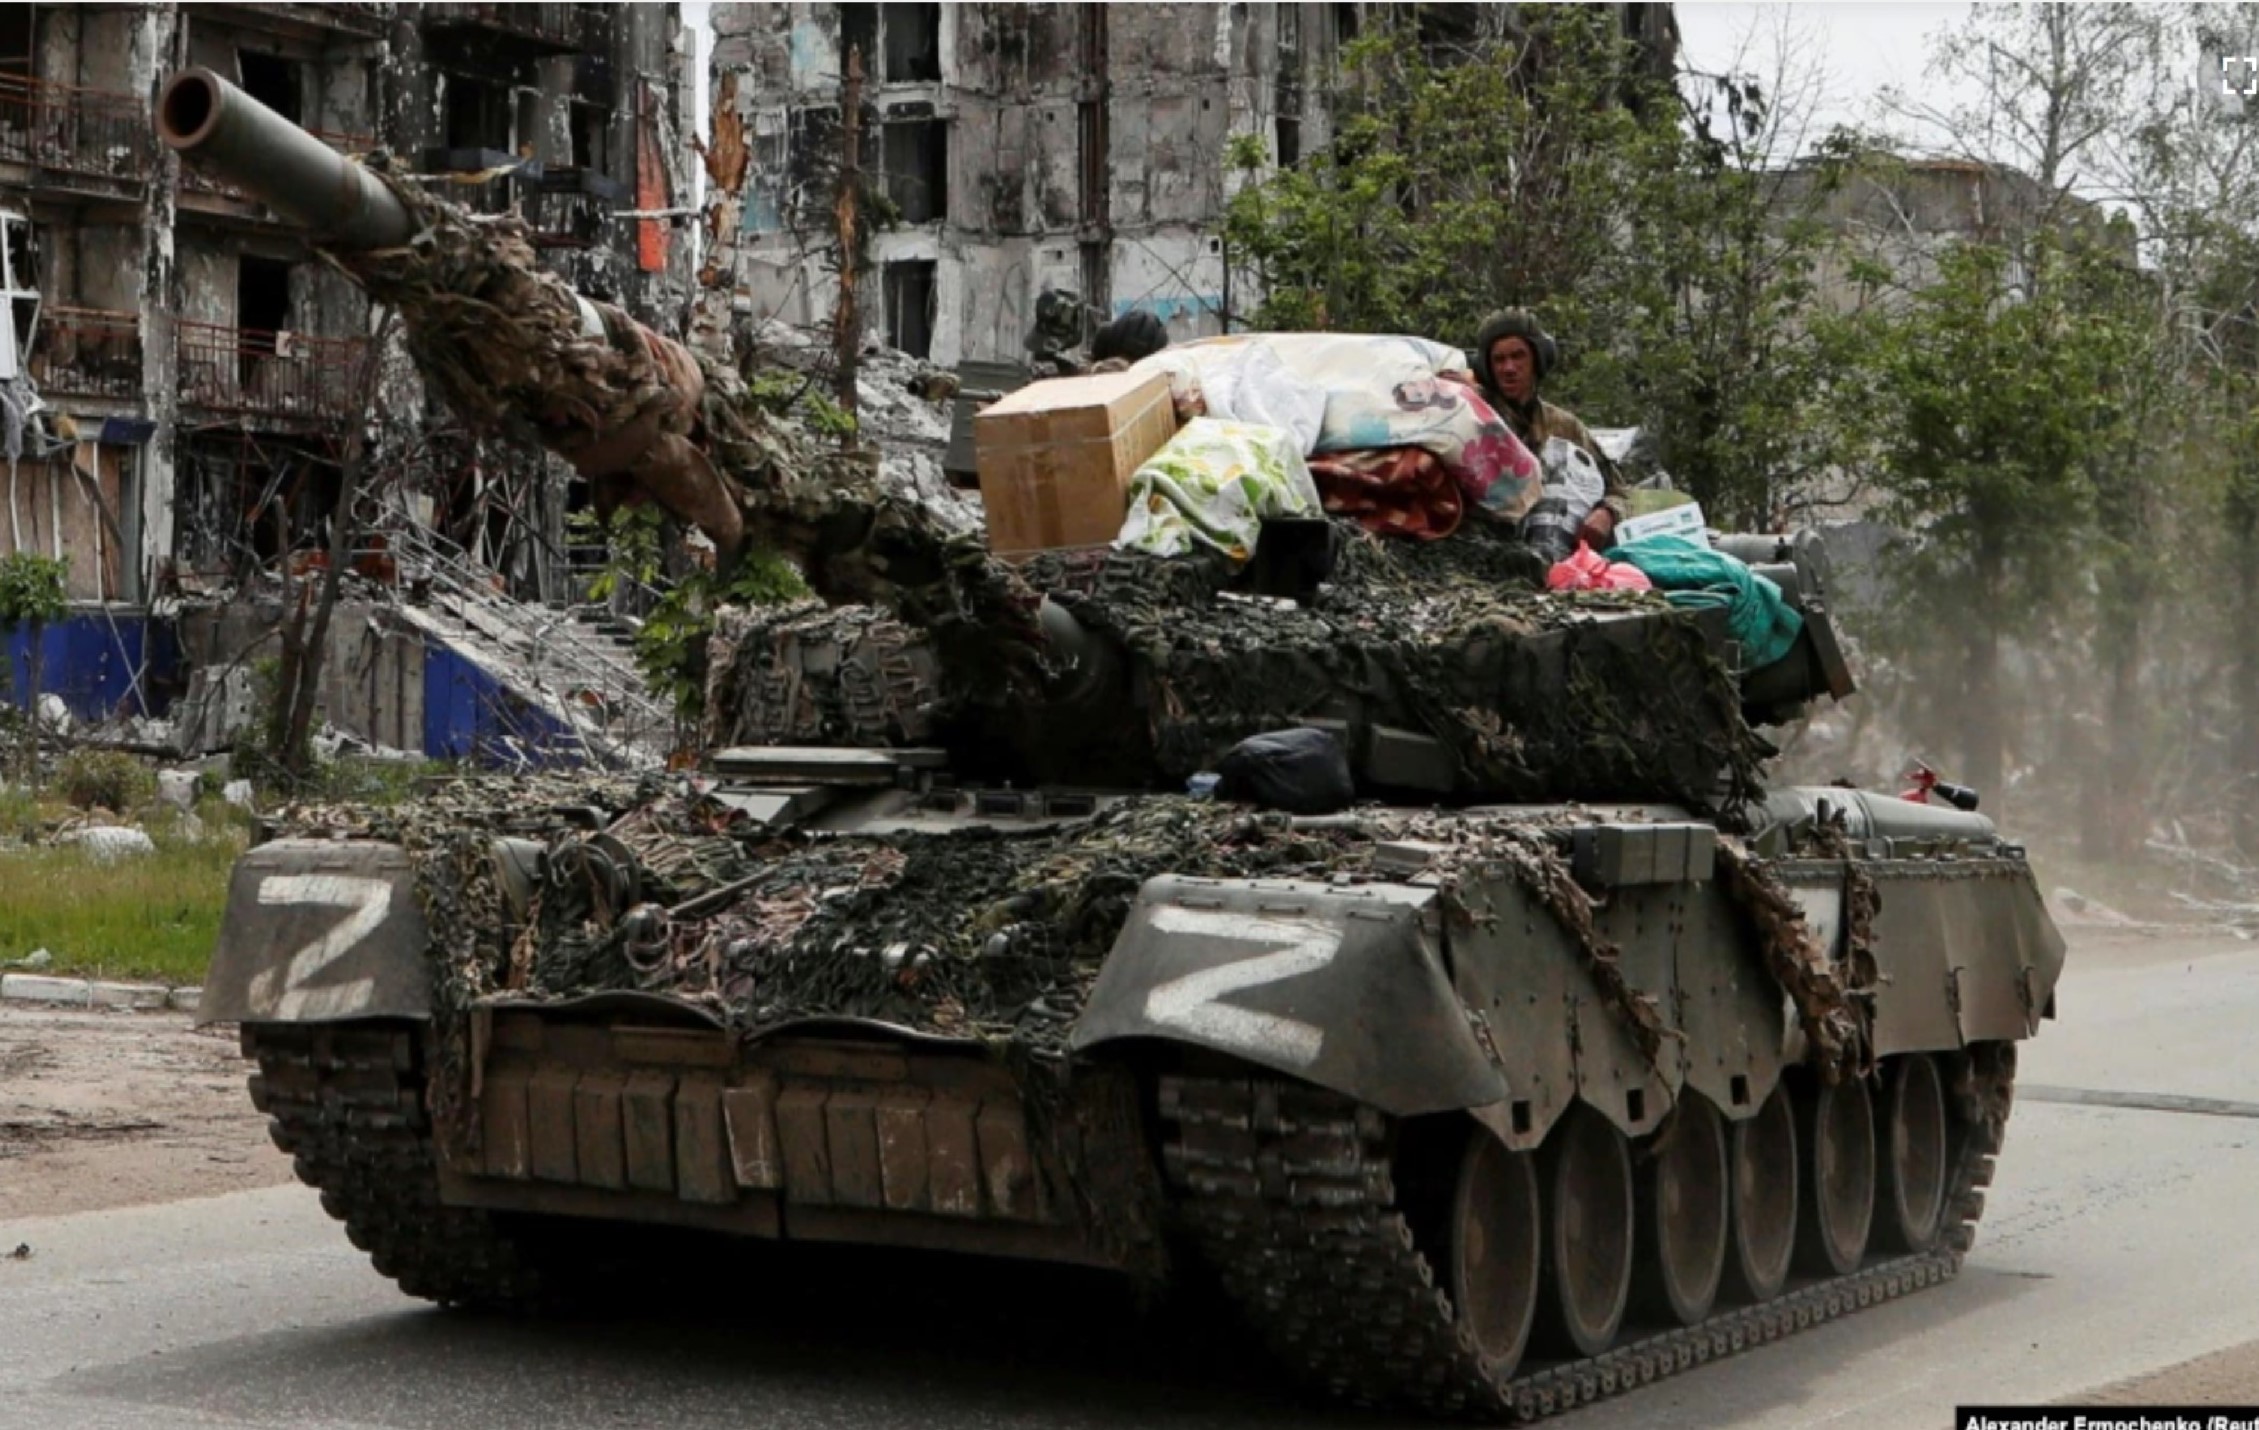 Russian invaders with items stolen from Ukrainian homes Photo Alexander Ermochenko, Reuters